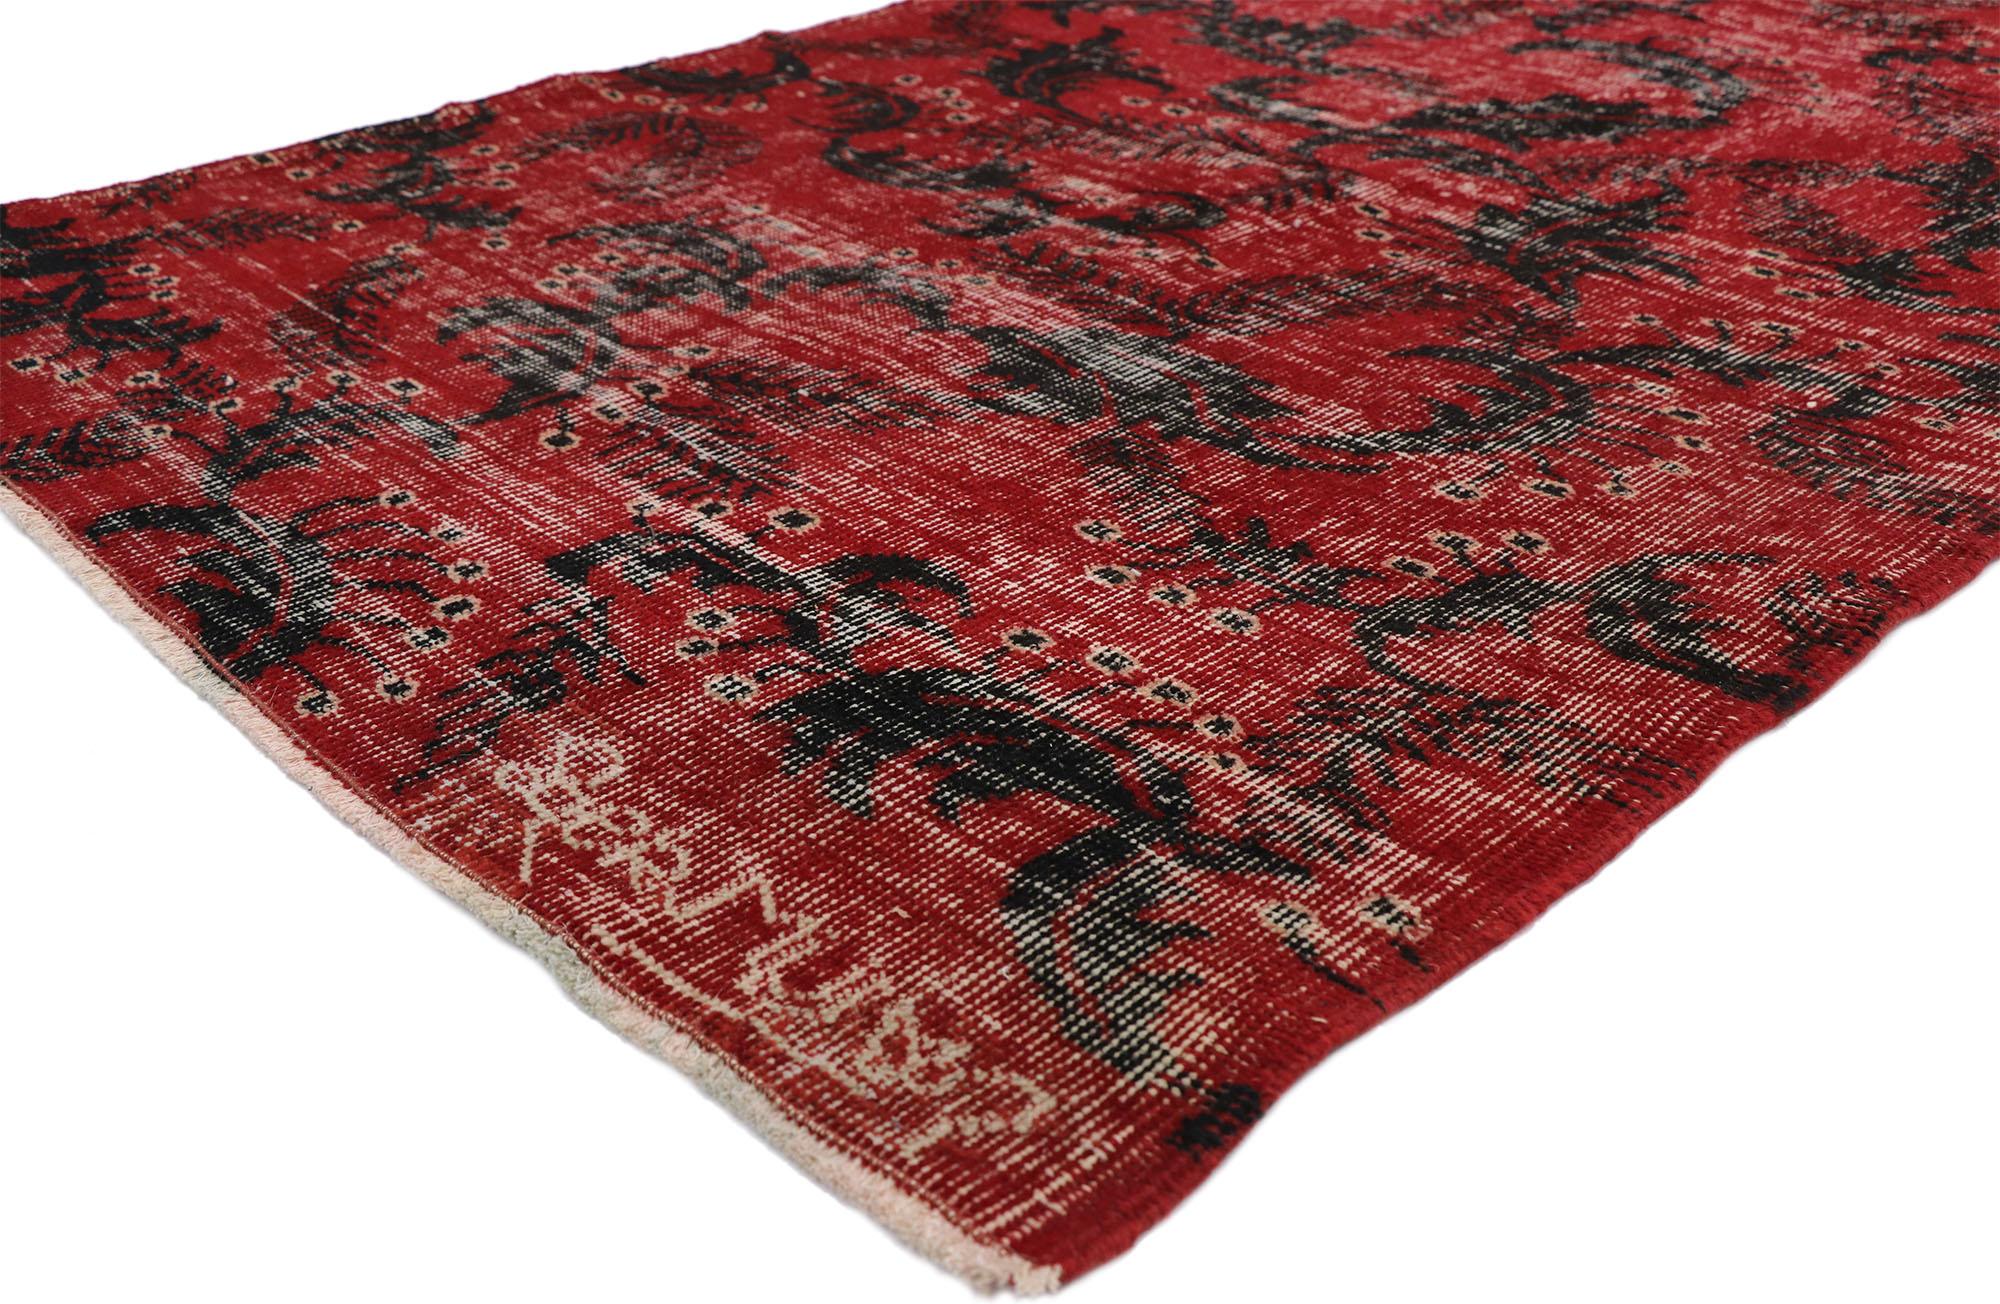 52588 Zeki Muren Distressed Vintage Turkish Sivas rug with Biophilia Prairie style. Reflecting elements of the Prairie School Movement but with a bold colorway, this hand-knotted wool distressed vintage Turkish Sivas rug awakens the soul with